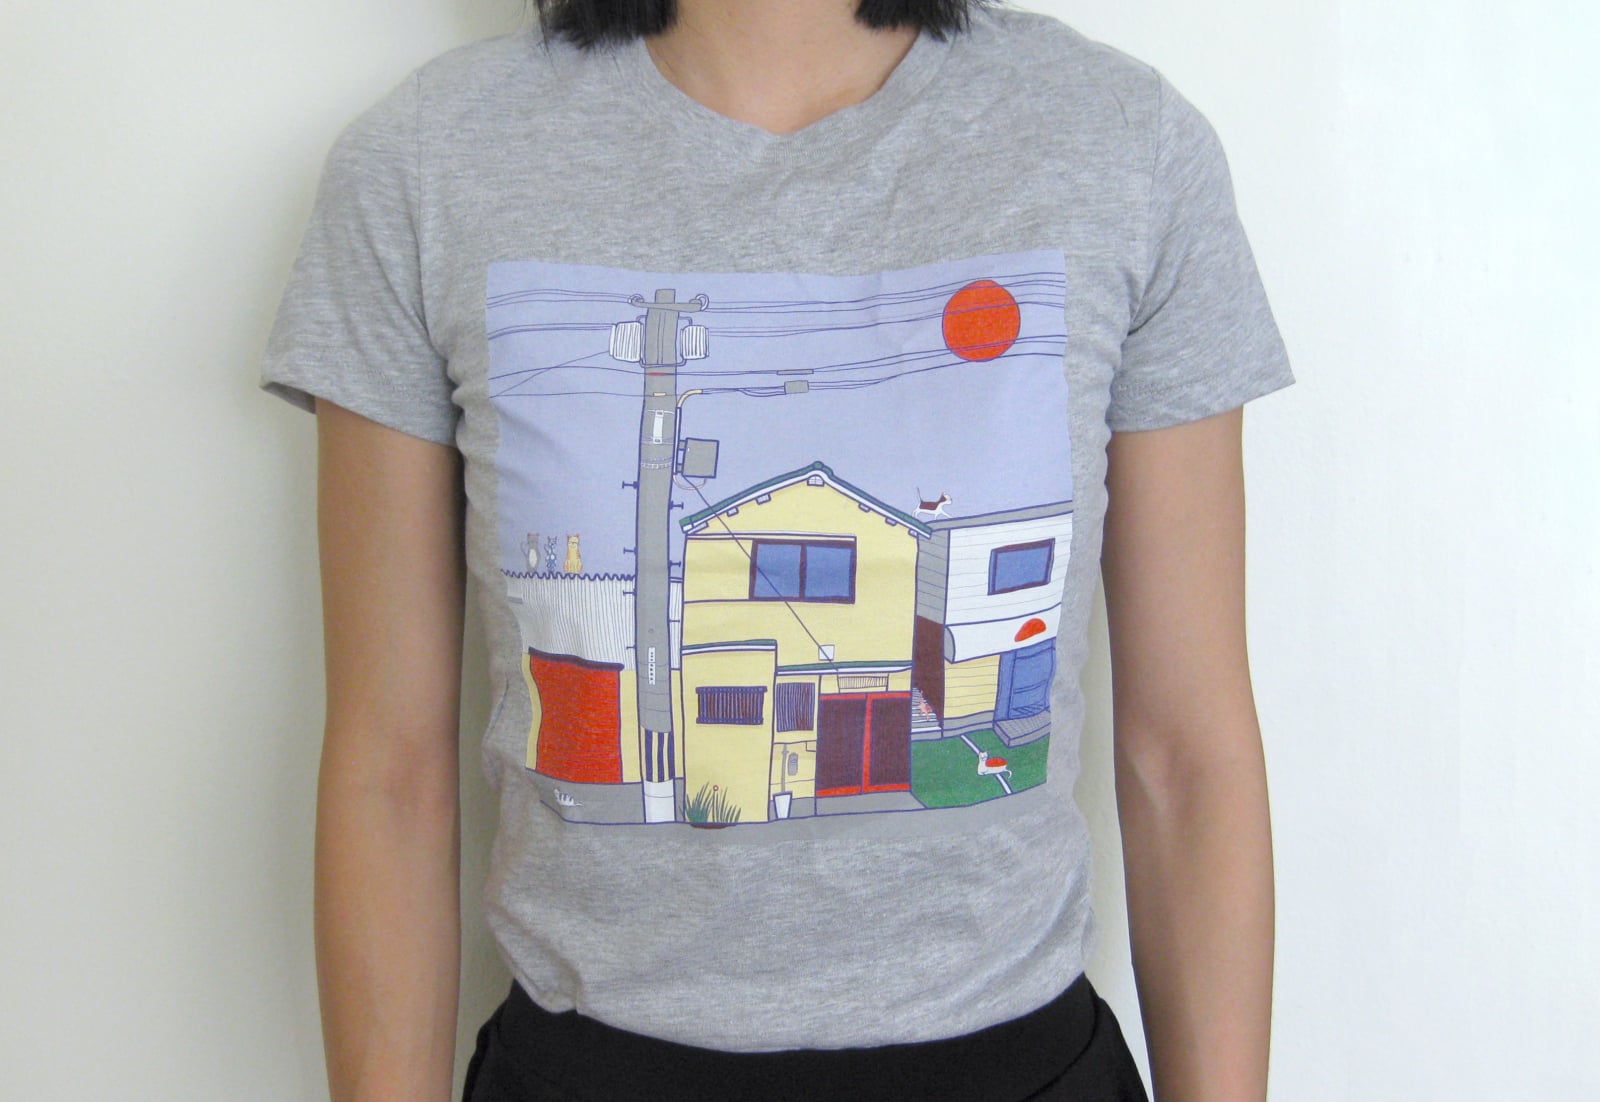 A grey T-shirt. There is an illustration of an Urban Japanese environment with several cats depicted.